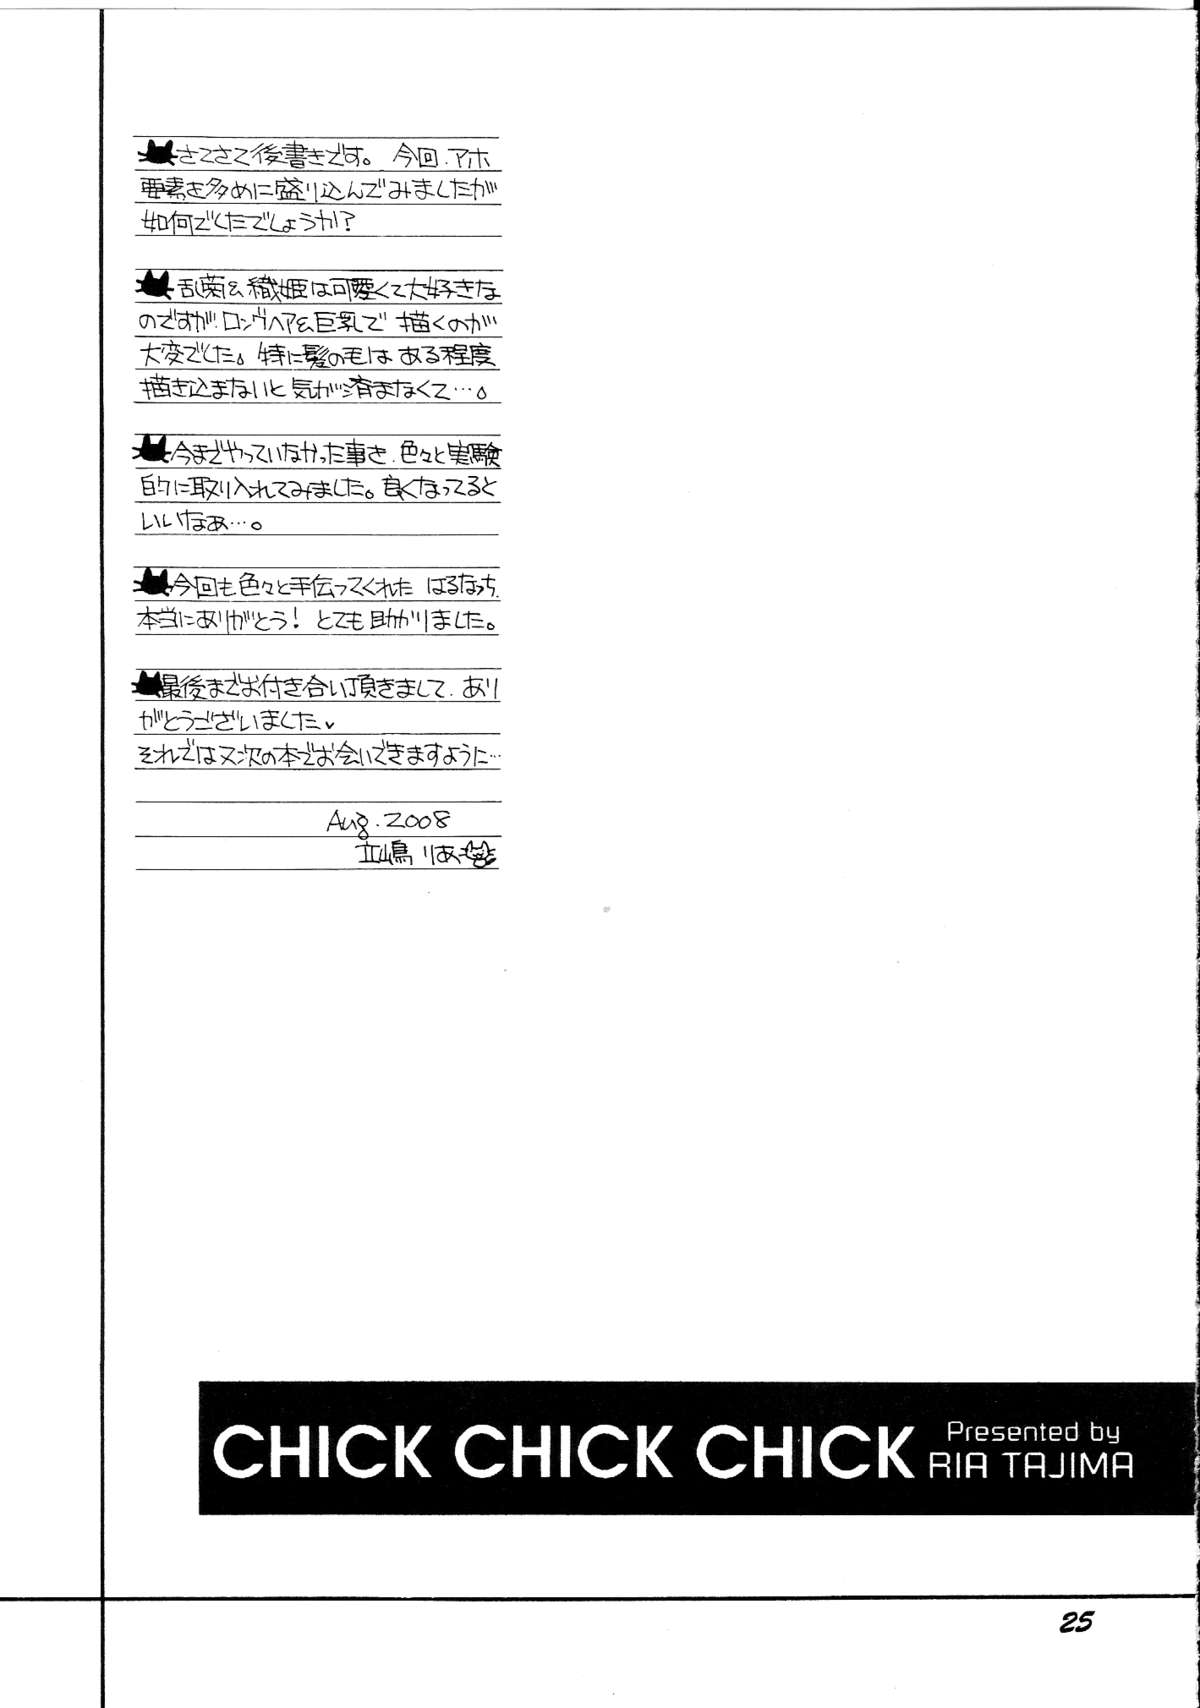 (C74) [SUBSONIC FACTOR (立嶋りあ)] CHICK CHICK CHICK (ブリーチ) [英訳]